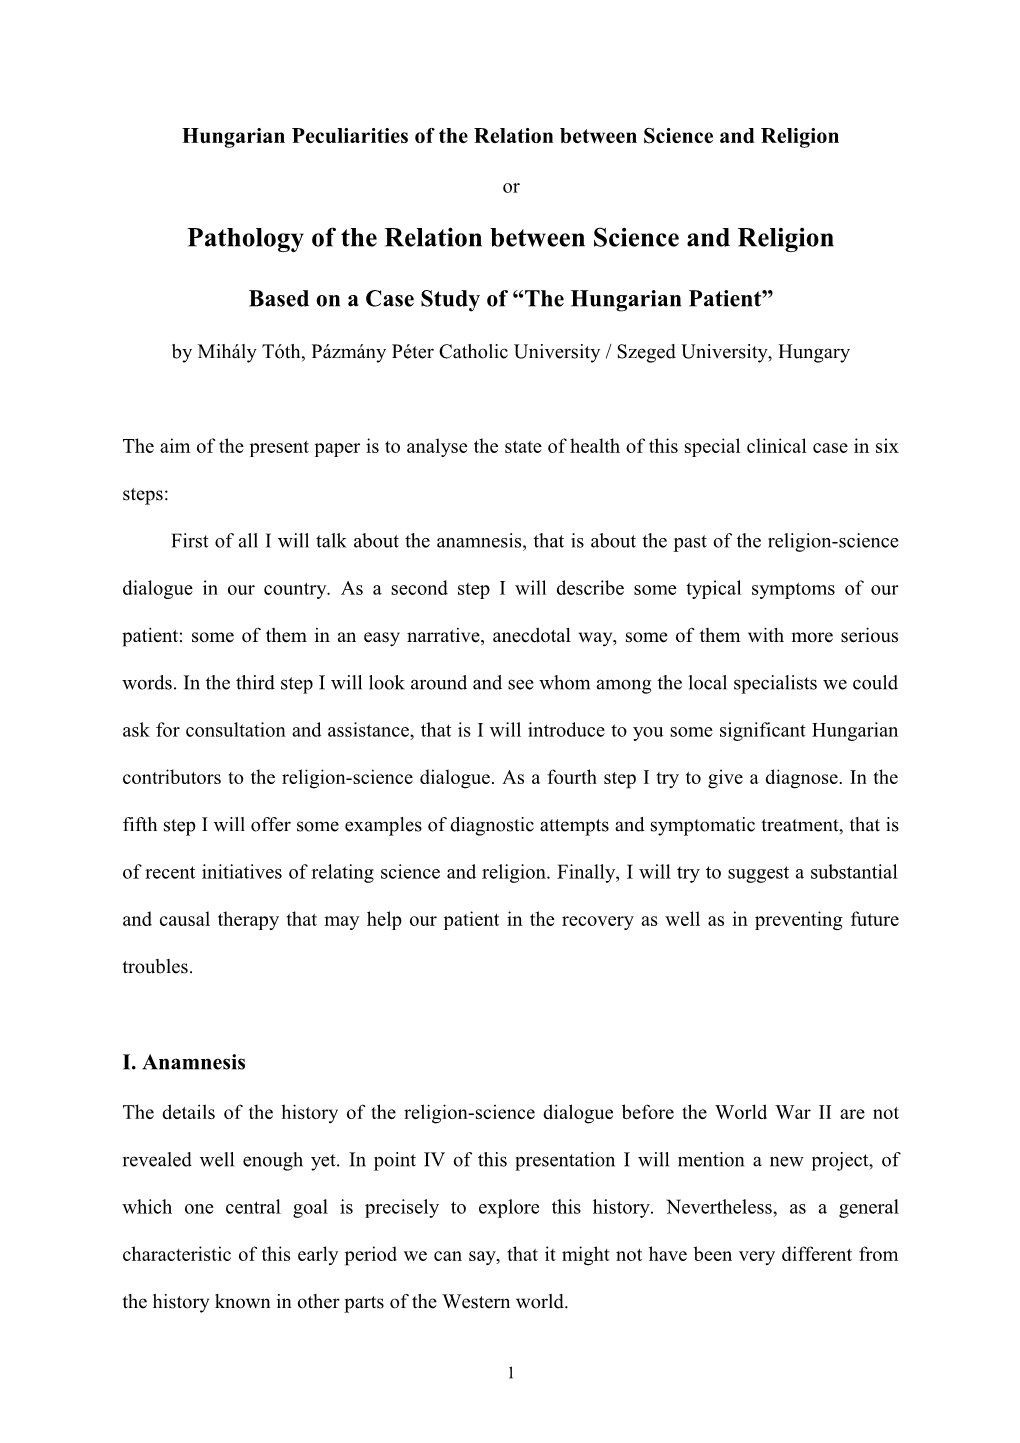 Hungarian Peculiarities of the Relation Between Science and Religion